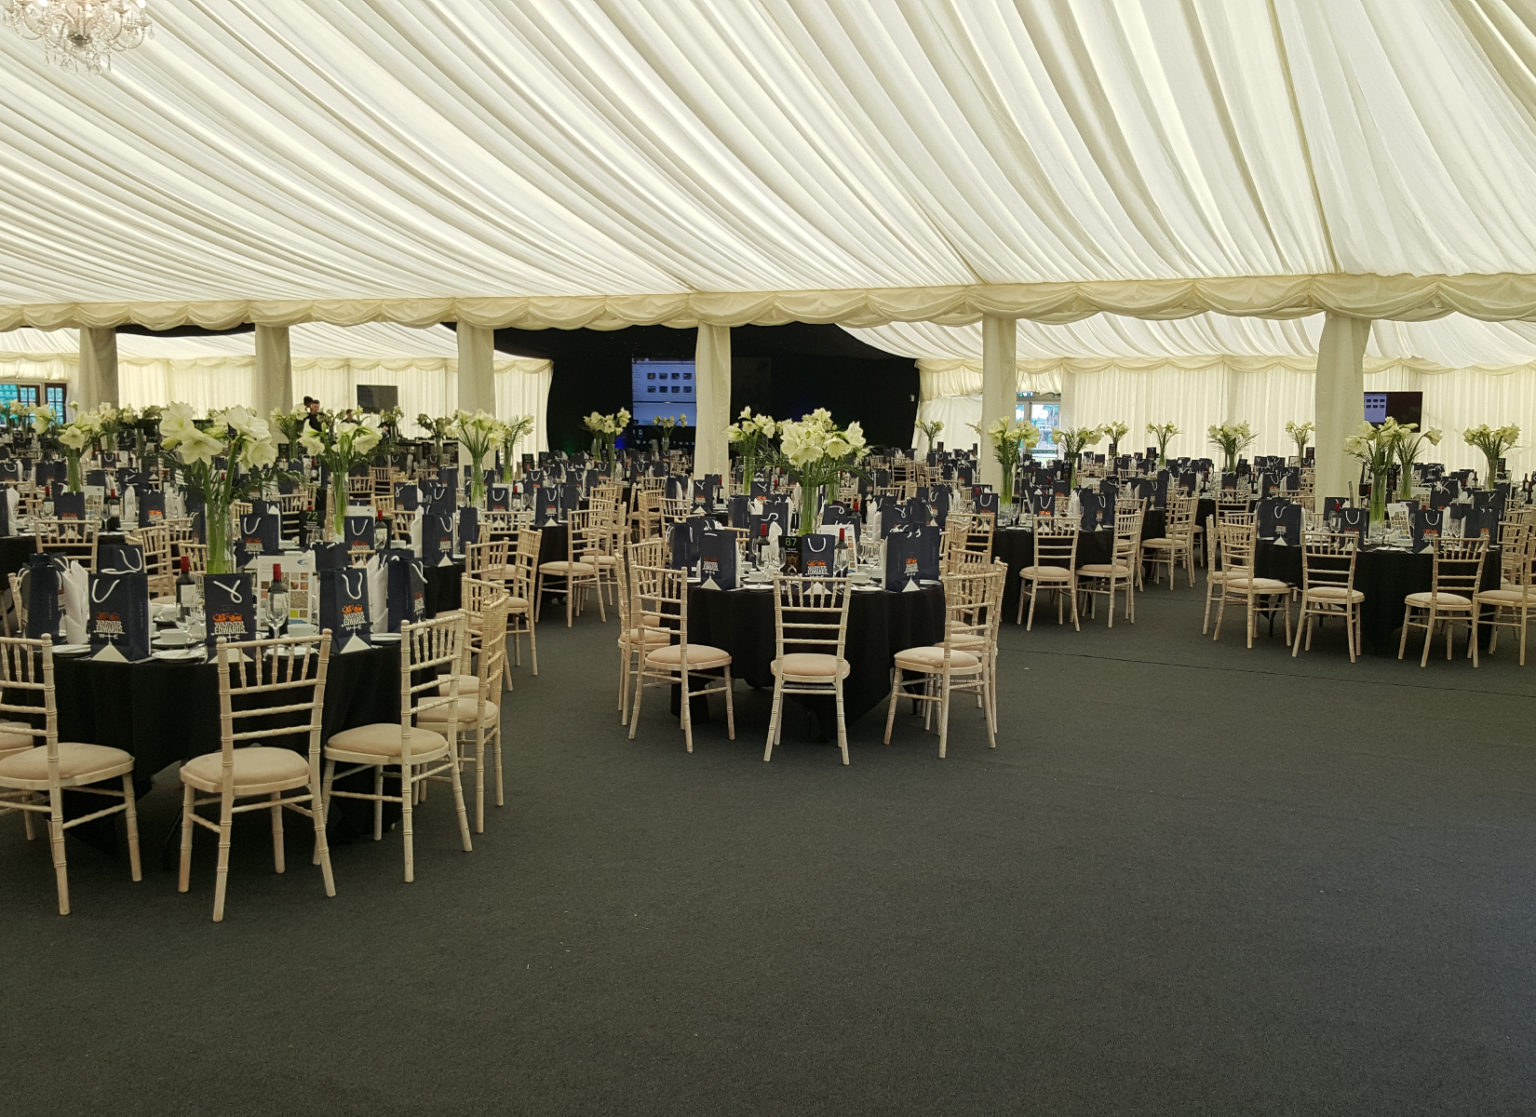 Northampton Saints Gala Dinner Marquee for 1000 Guests